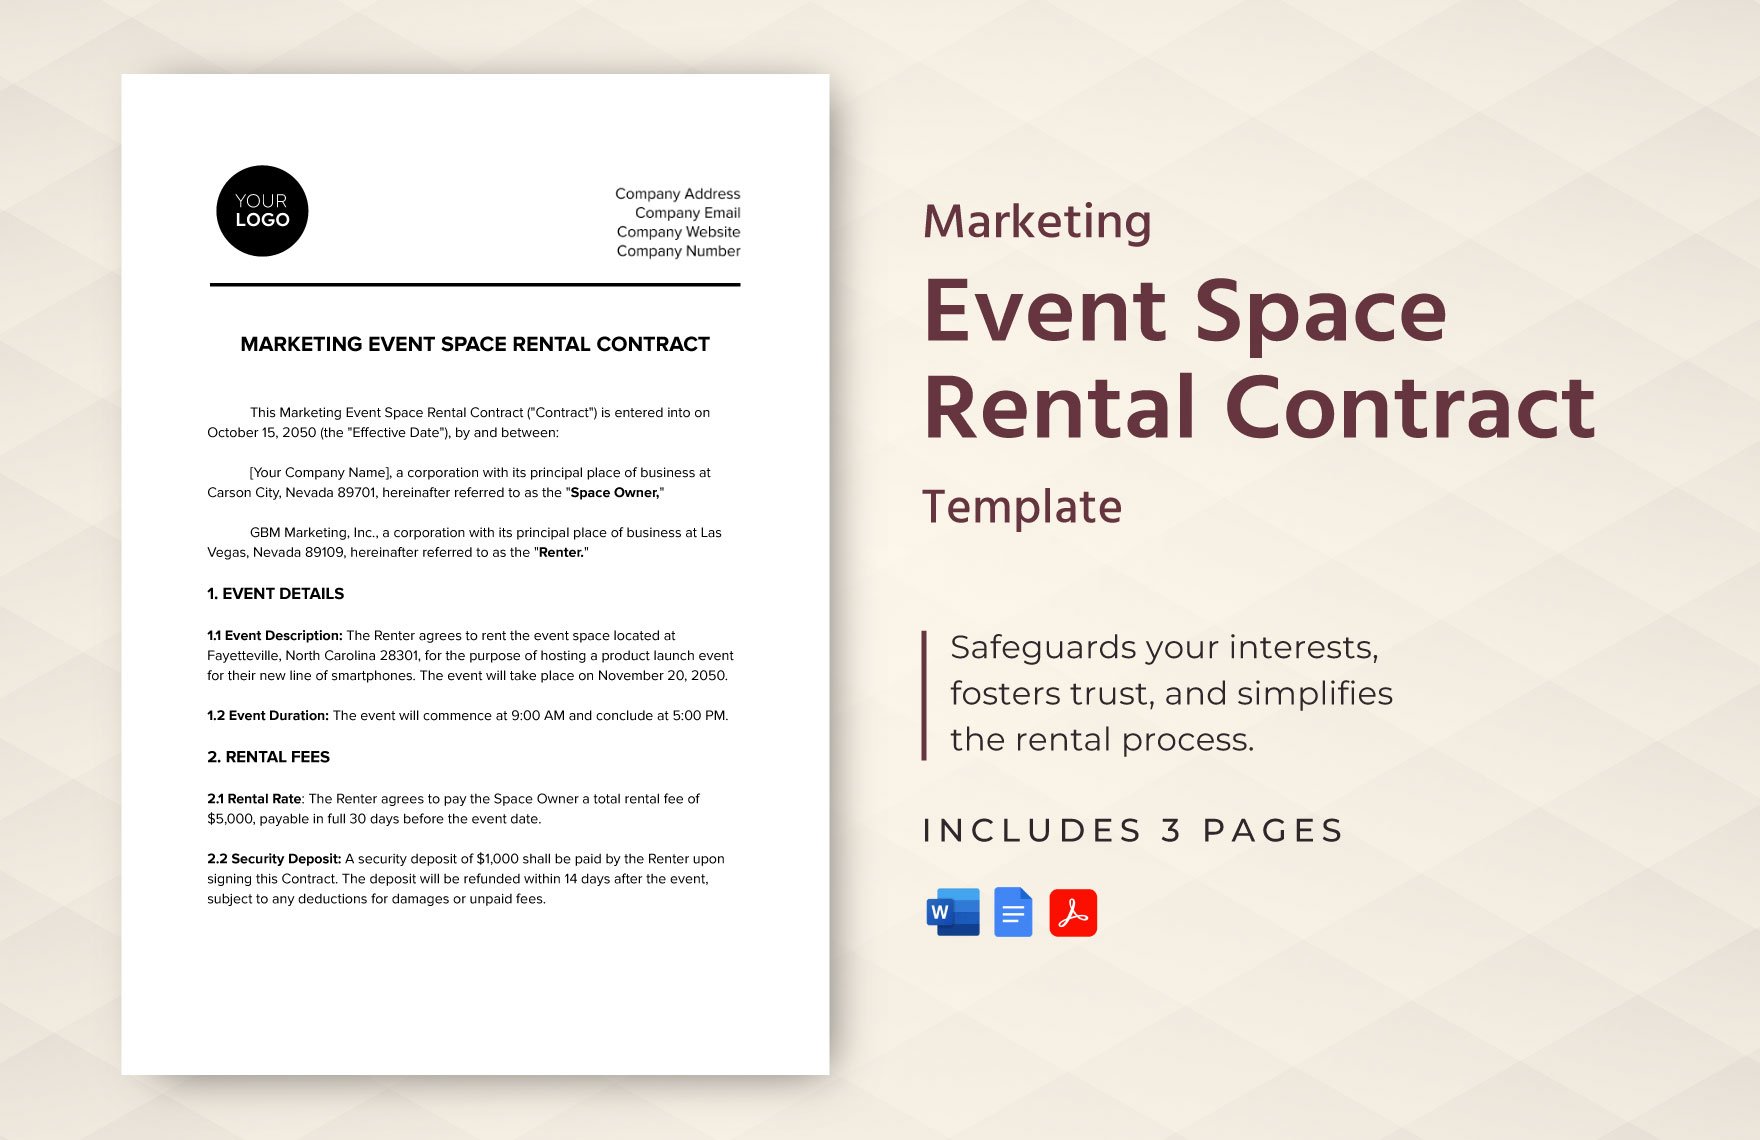 Marketing Event Space Rental Contract Template